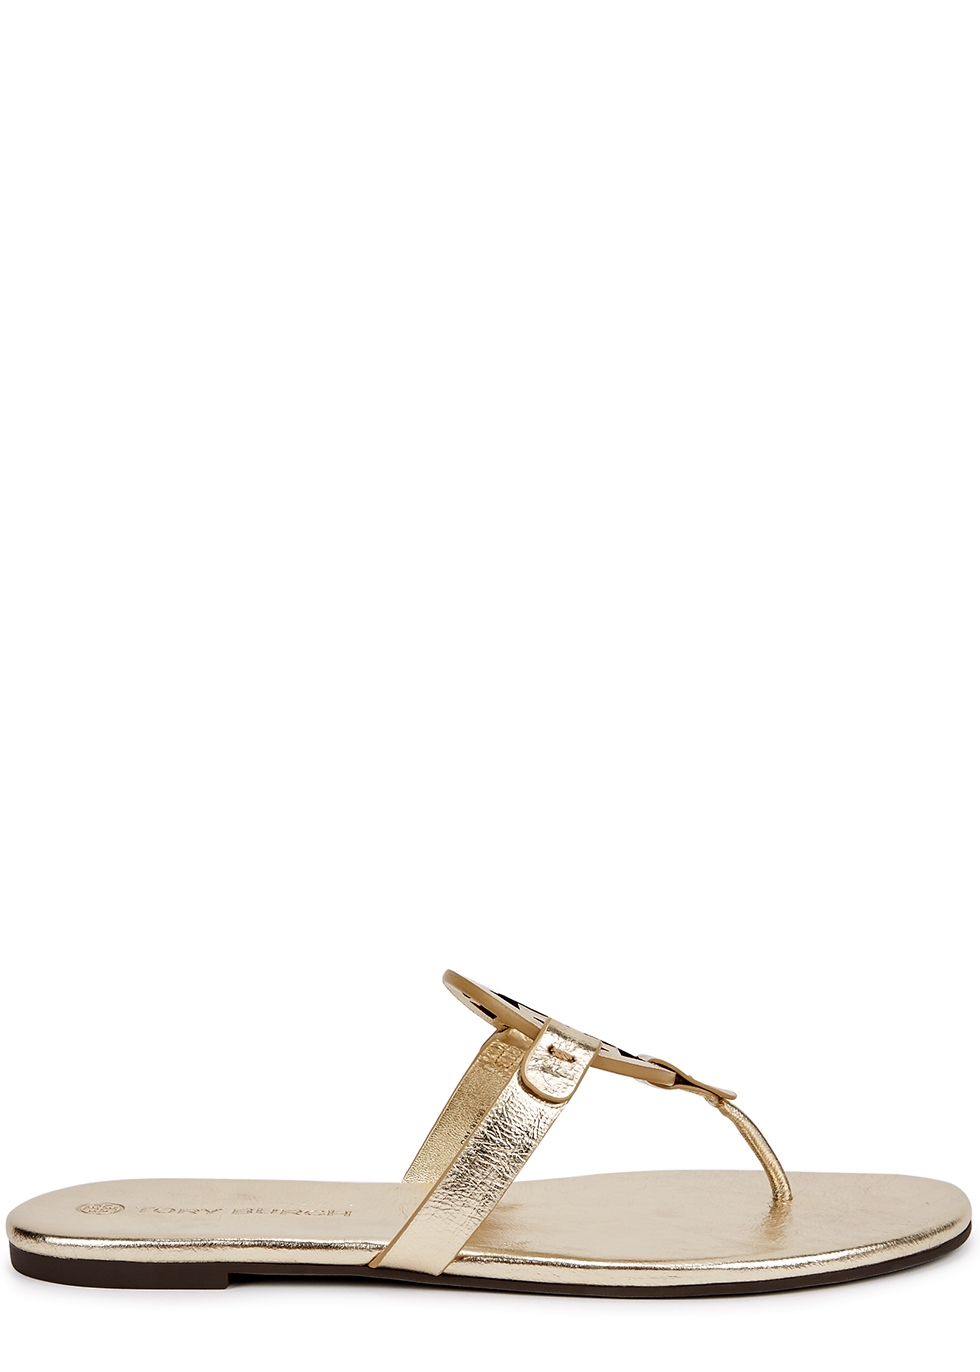 Miller gold-tone leather sandals